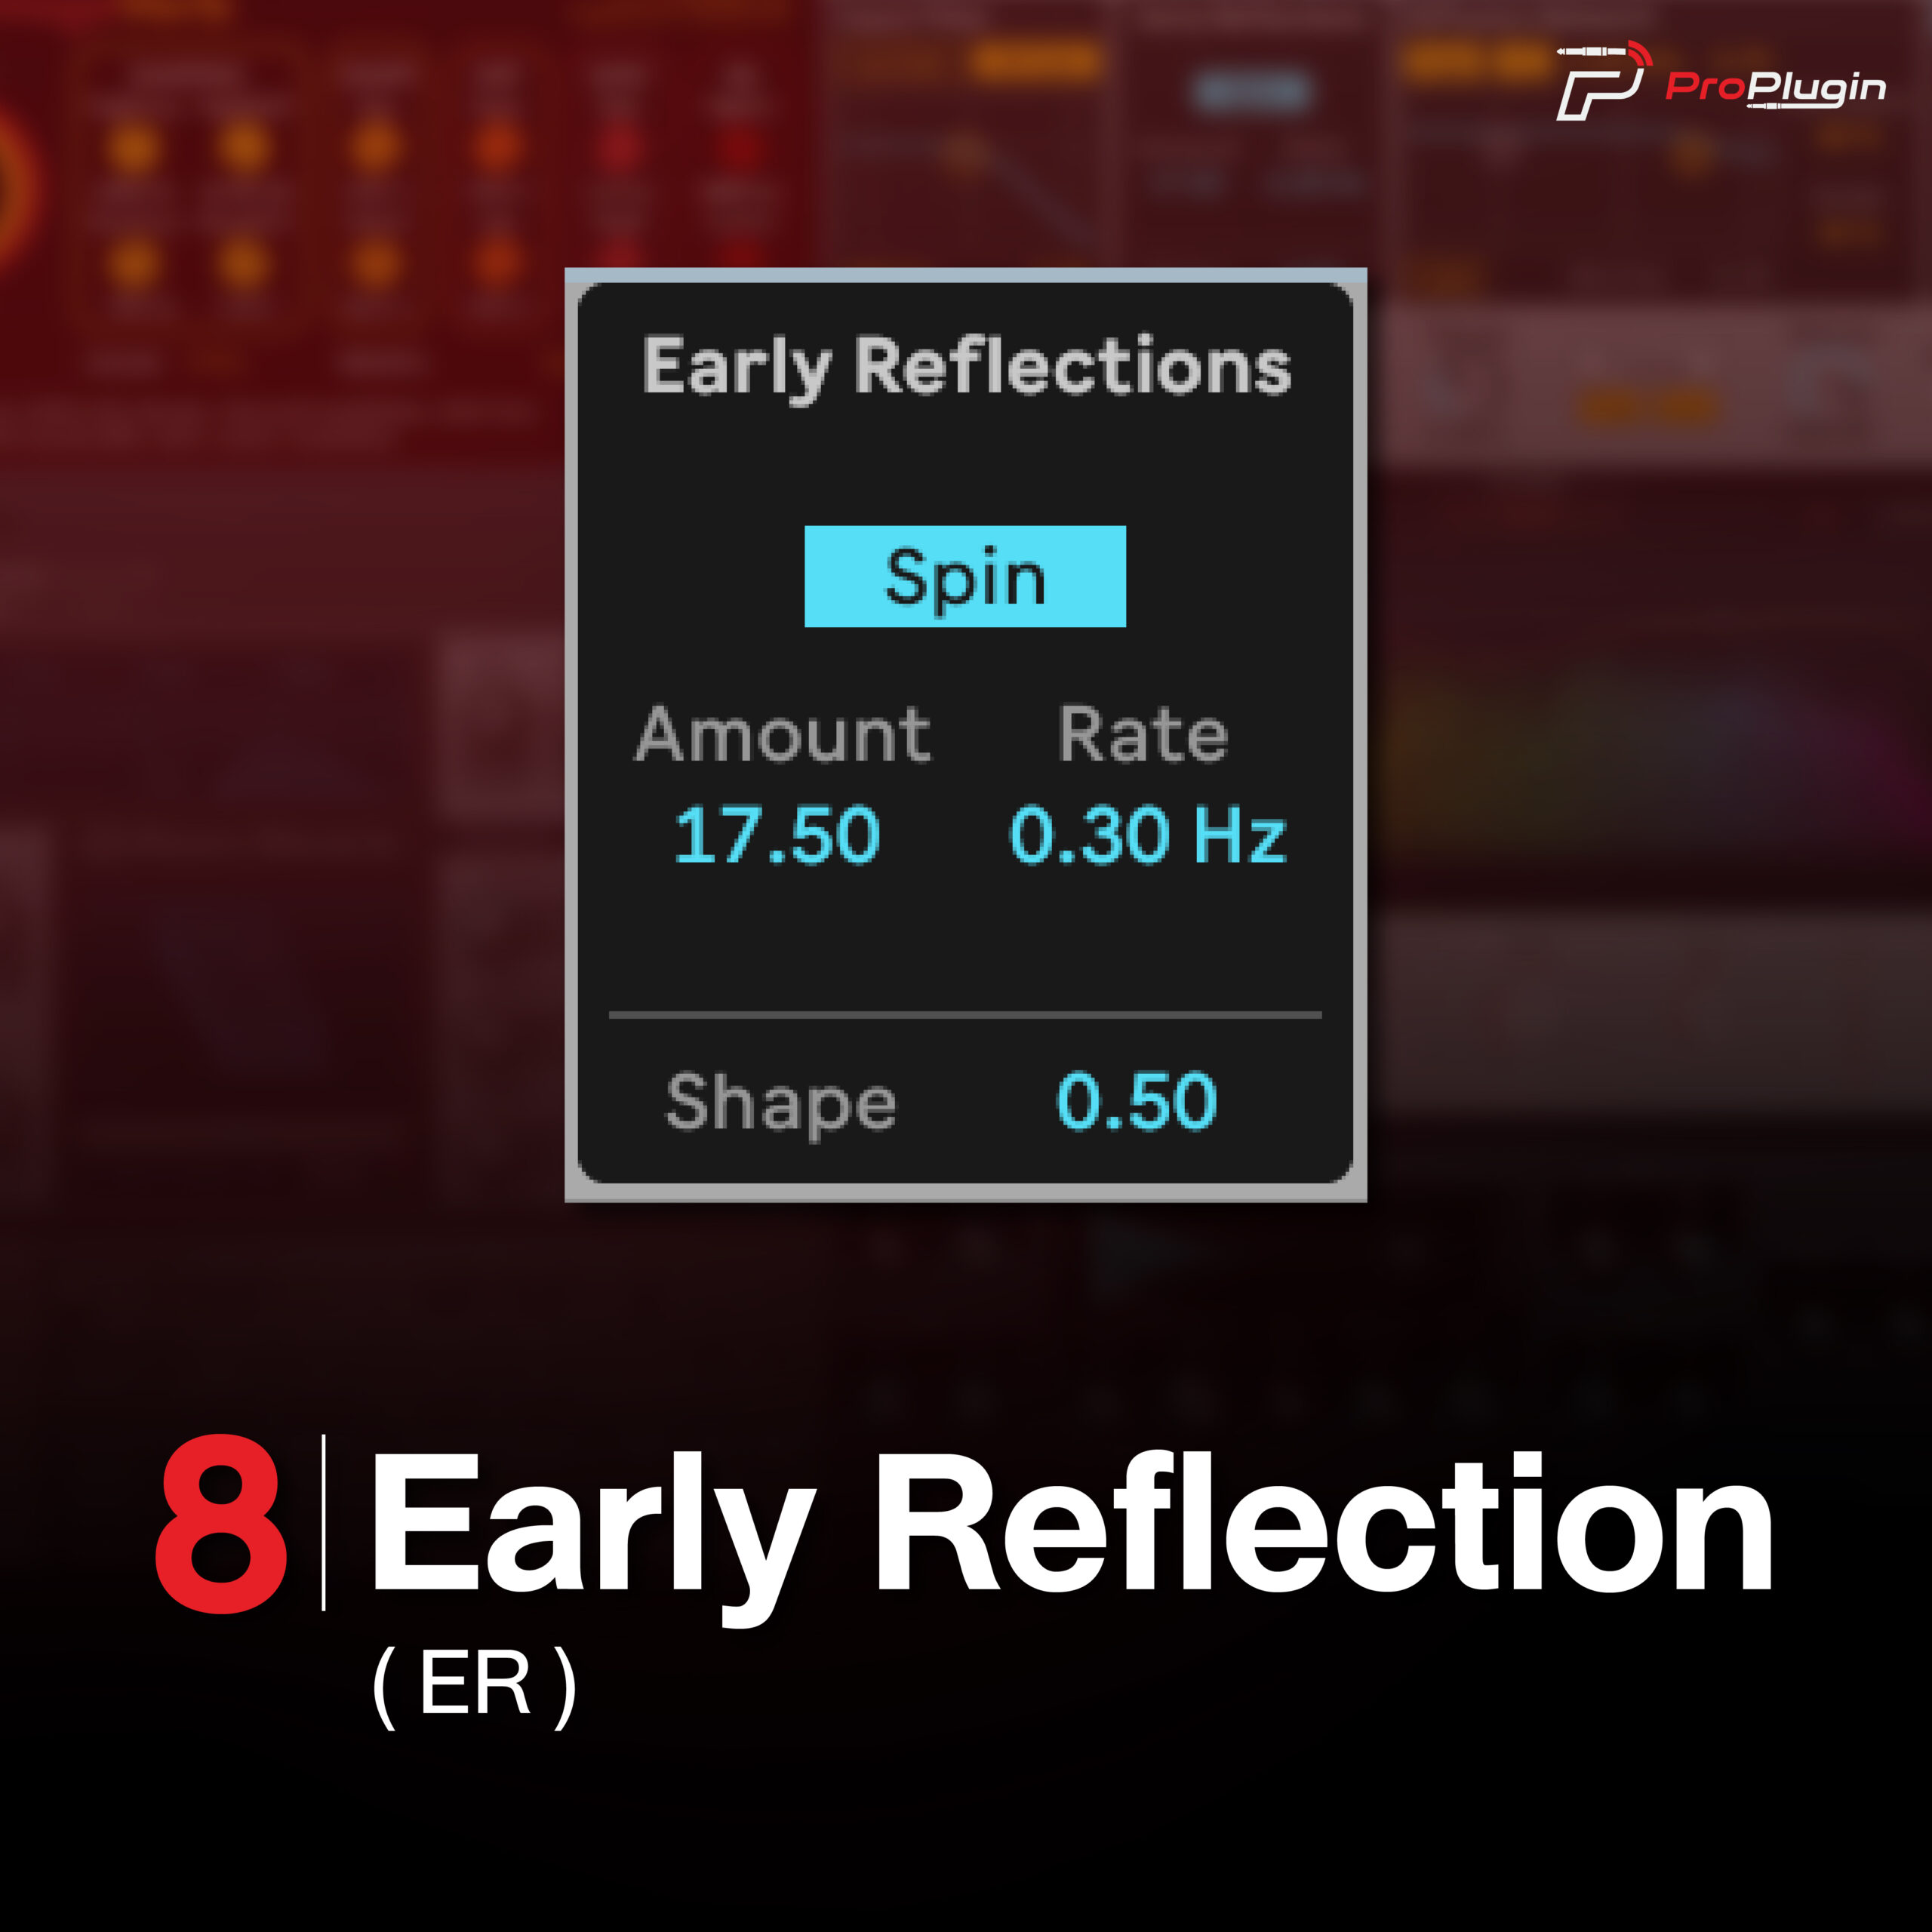 8. Early Refiection